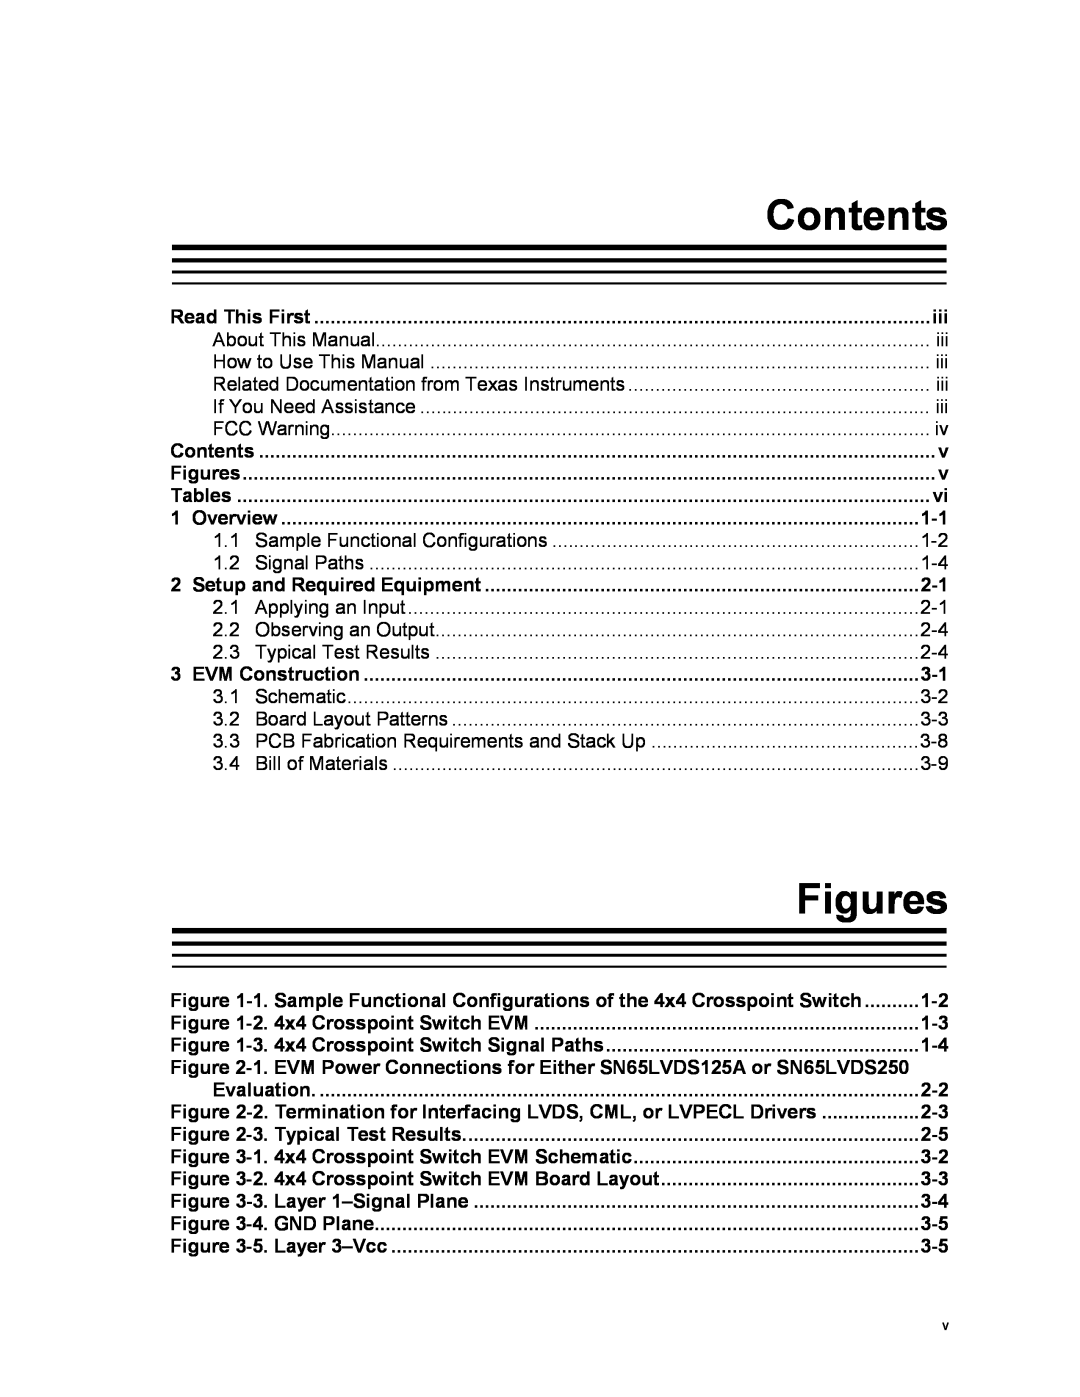 Texas Instruments HPL-D SLLU064A manual Contents, Figures, 2. Termination for Interfacing LVDS, CML, or LVPECL Drivers 